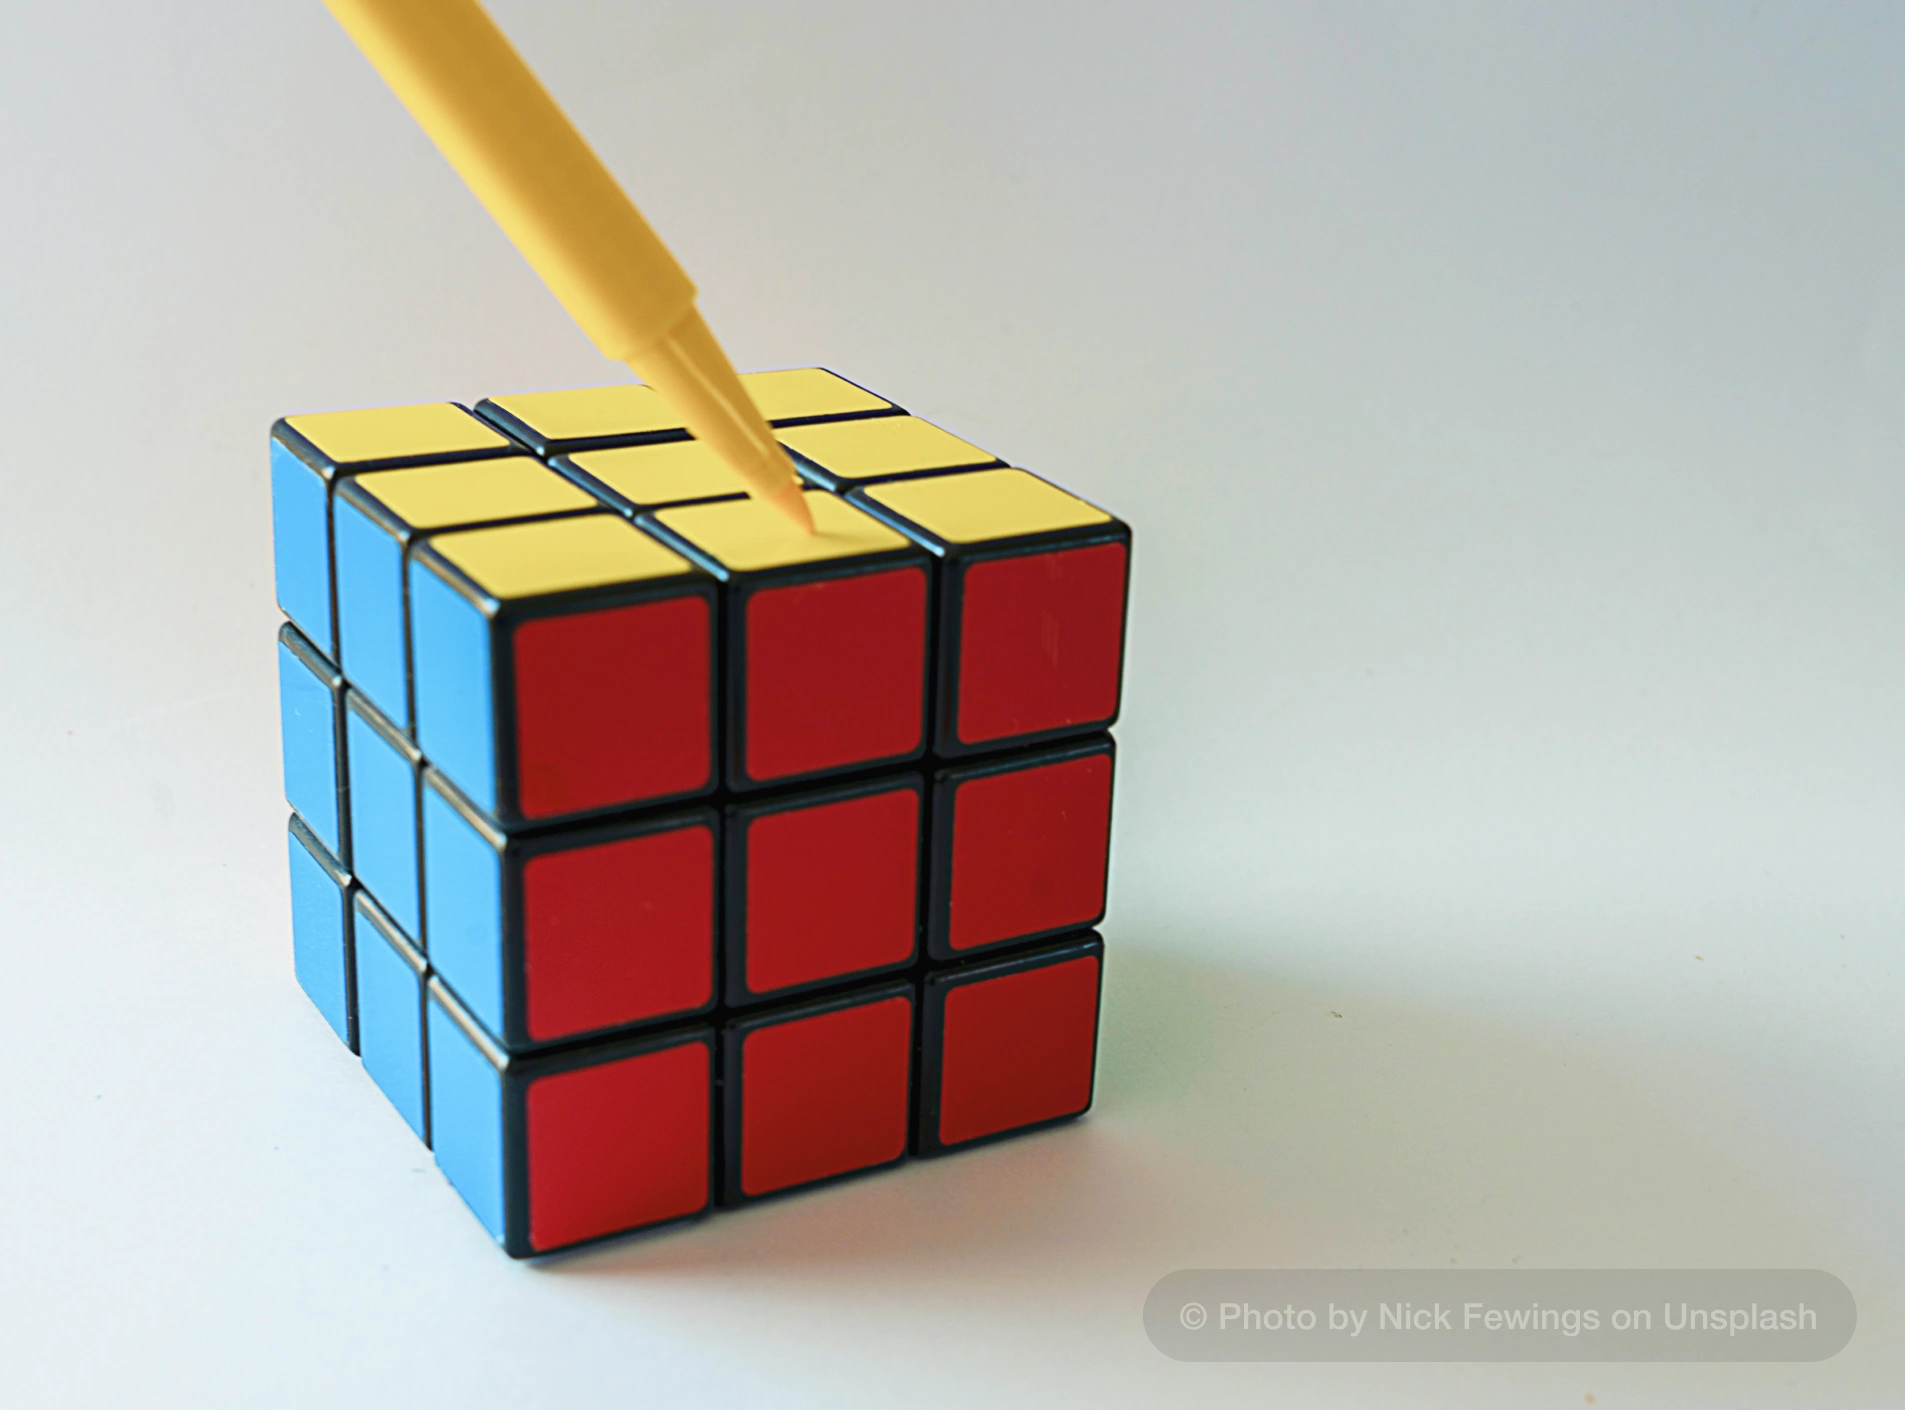 Learn All About Rubik’s Cube, Its Types and Parts